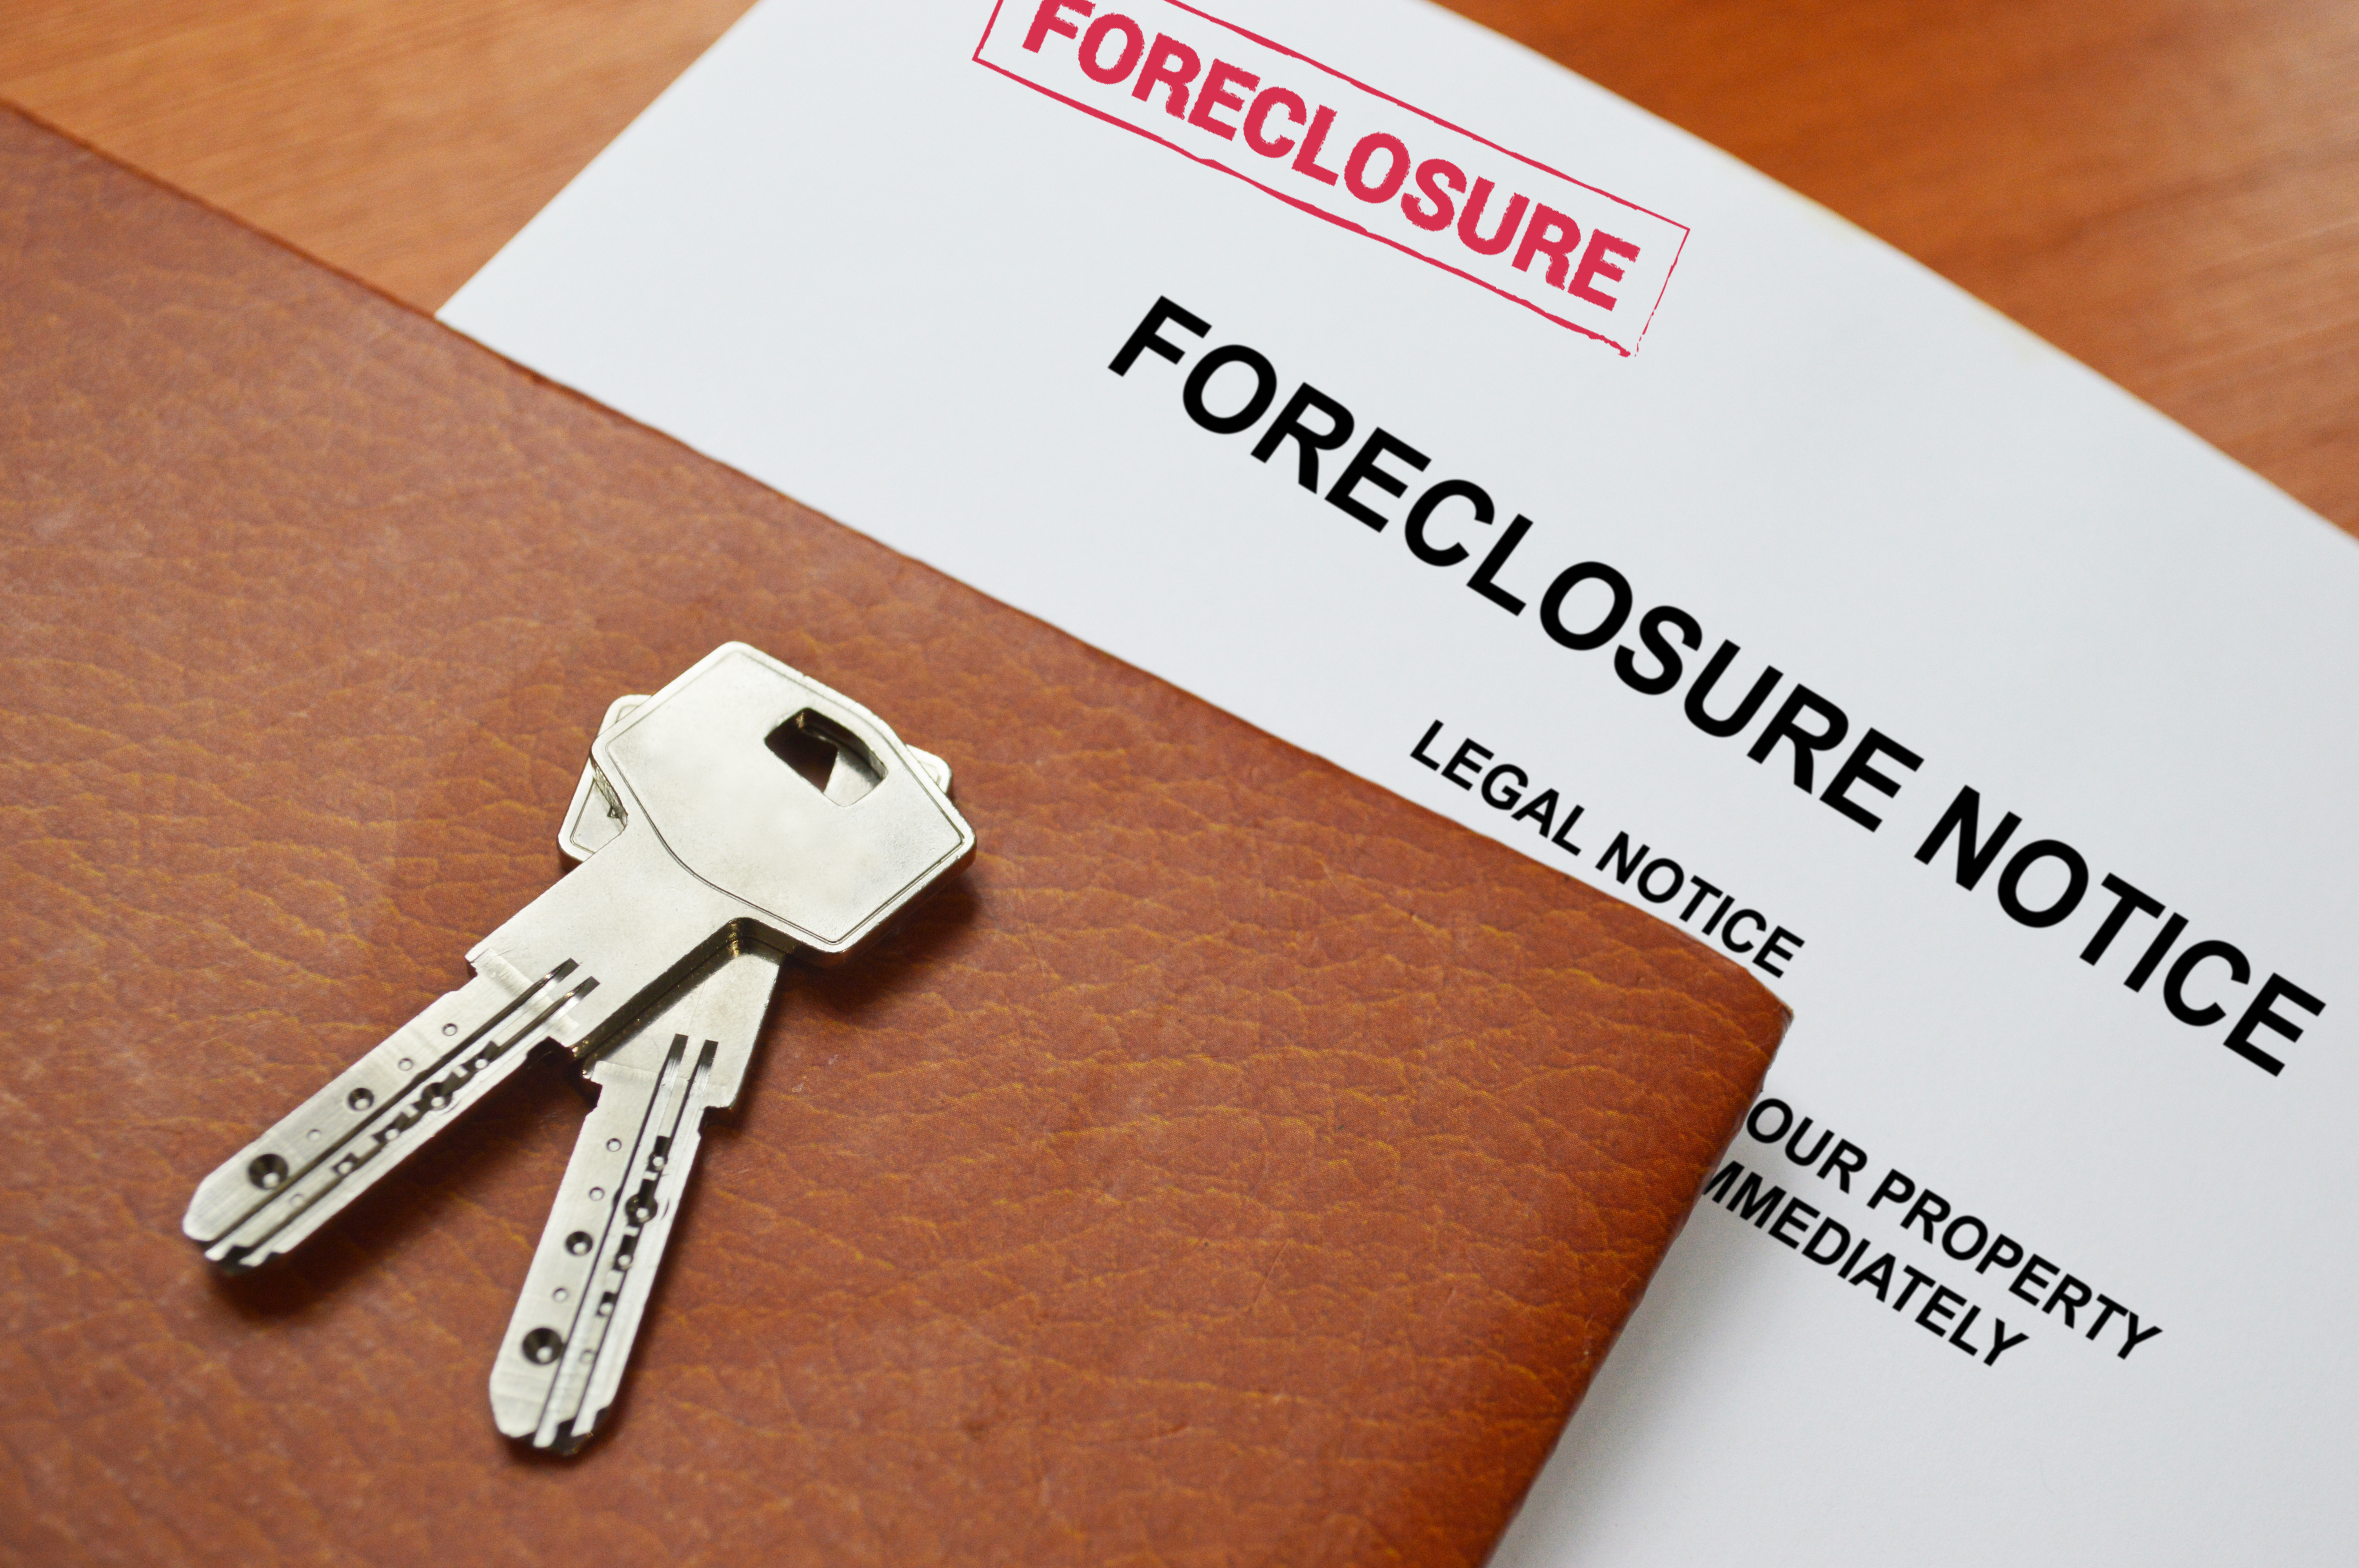 Forthcoming Foreclosures, Occupancy Verification Inspections, and Property Condition Reports